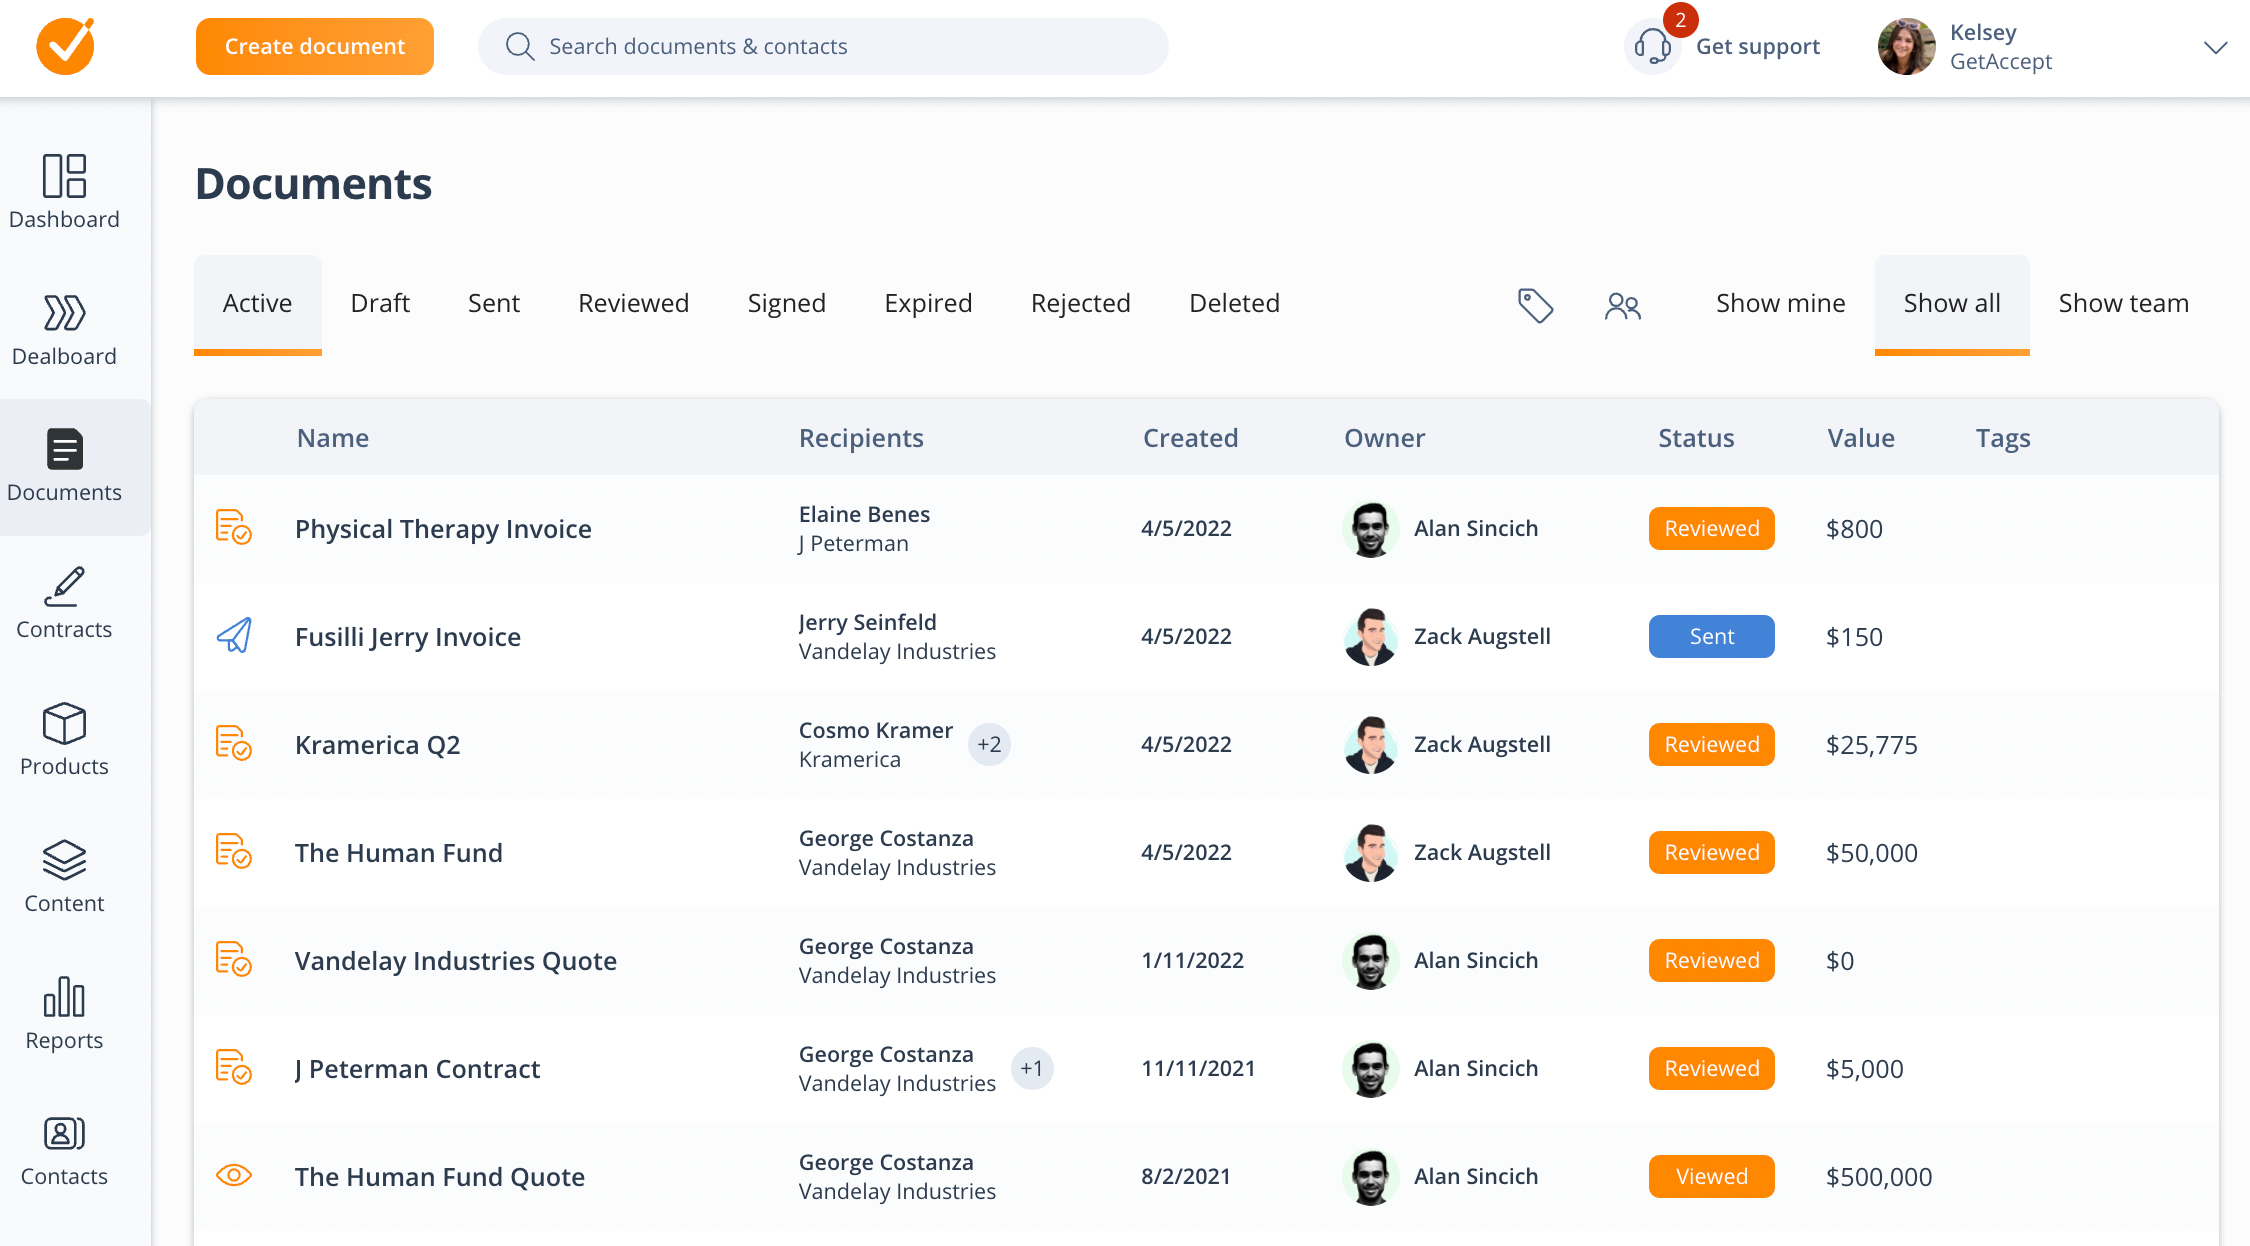 GetAccept Software 2023 Reviews, Pricing & Demo